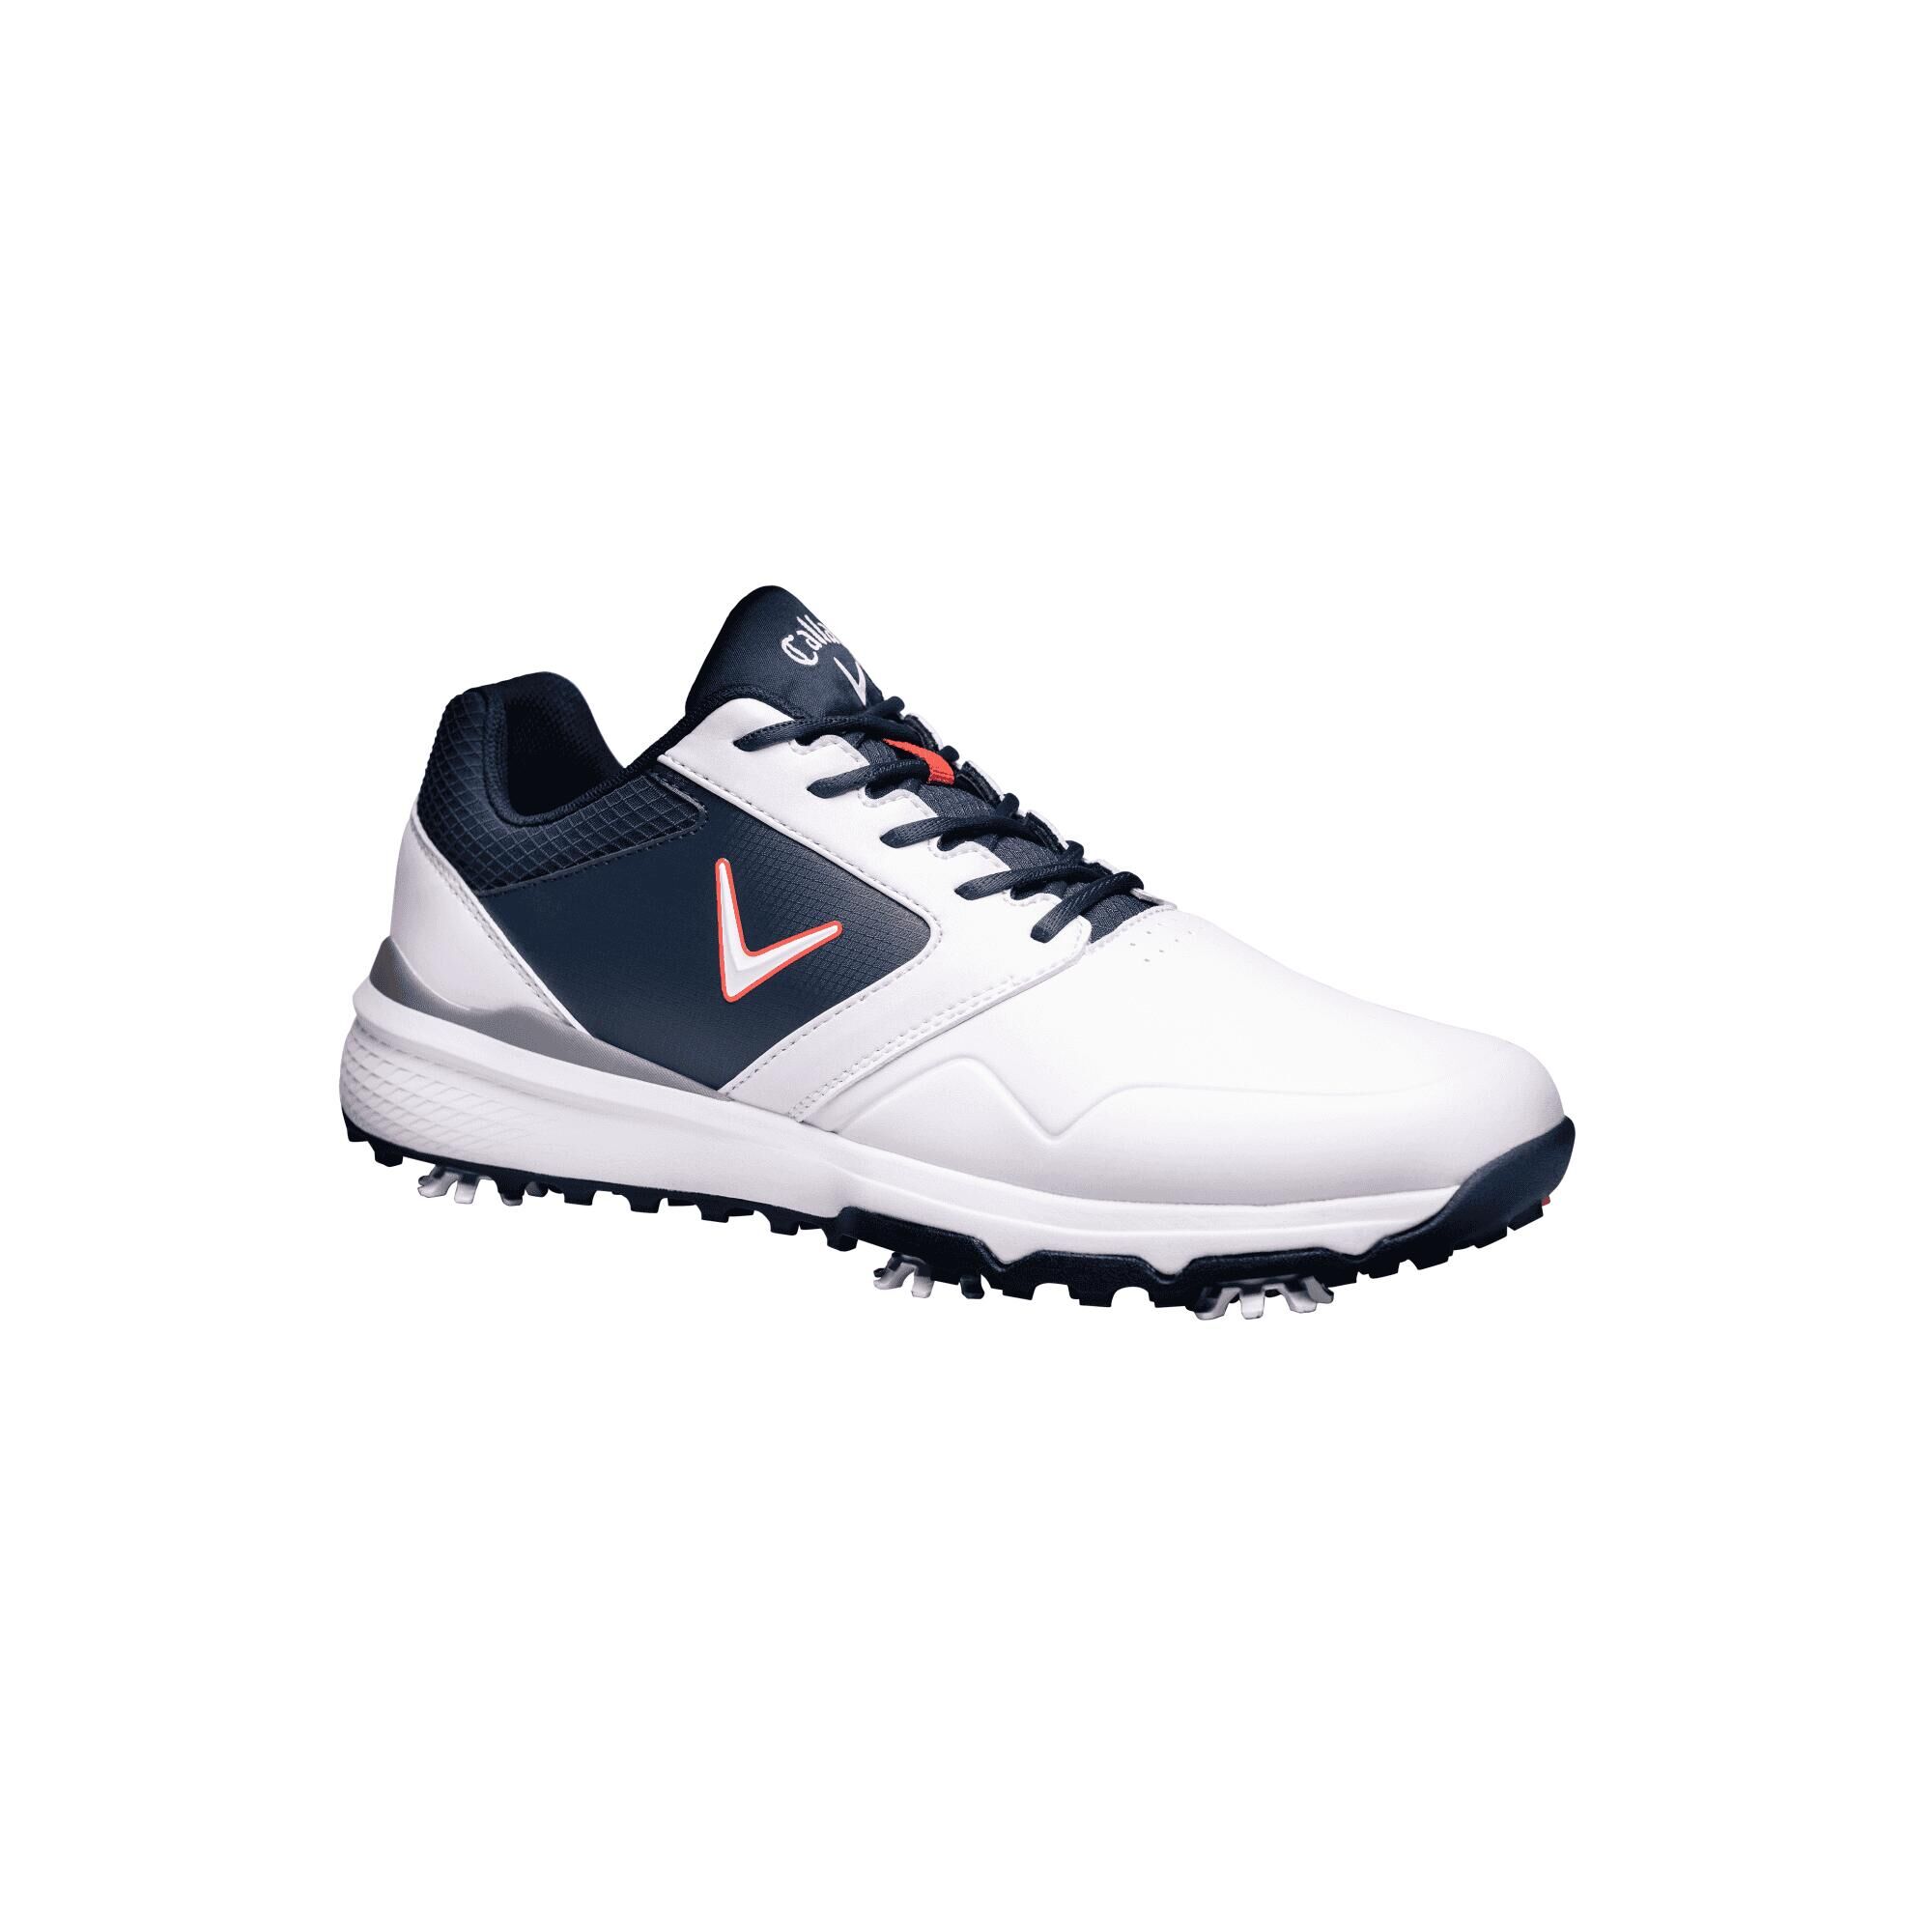 CALLAWAY Callaway 2022 Mens CHEV LS Golf Shoes WHITE/NAVY/RED